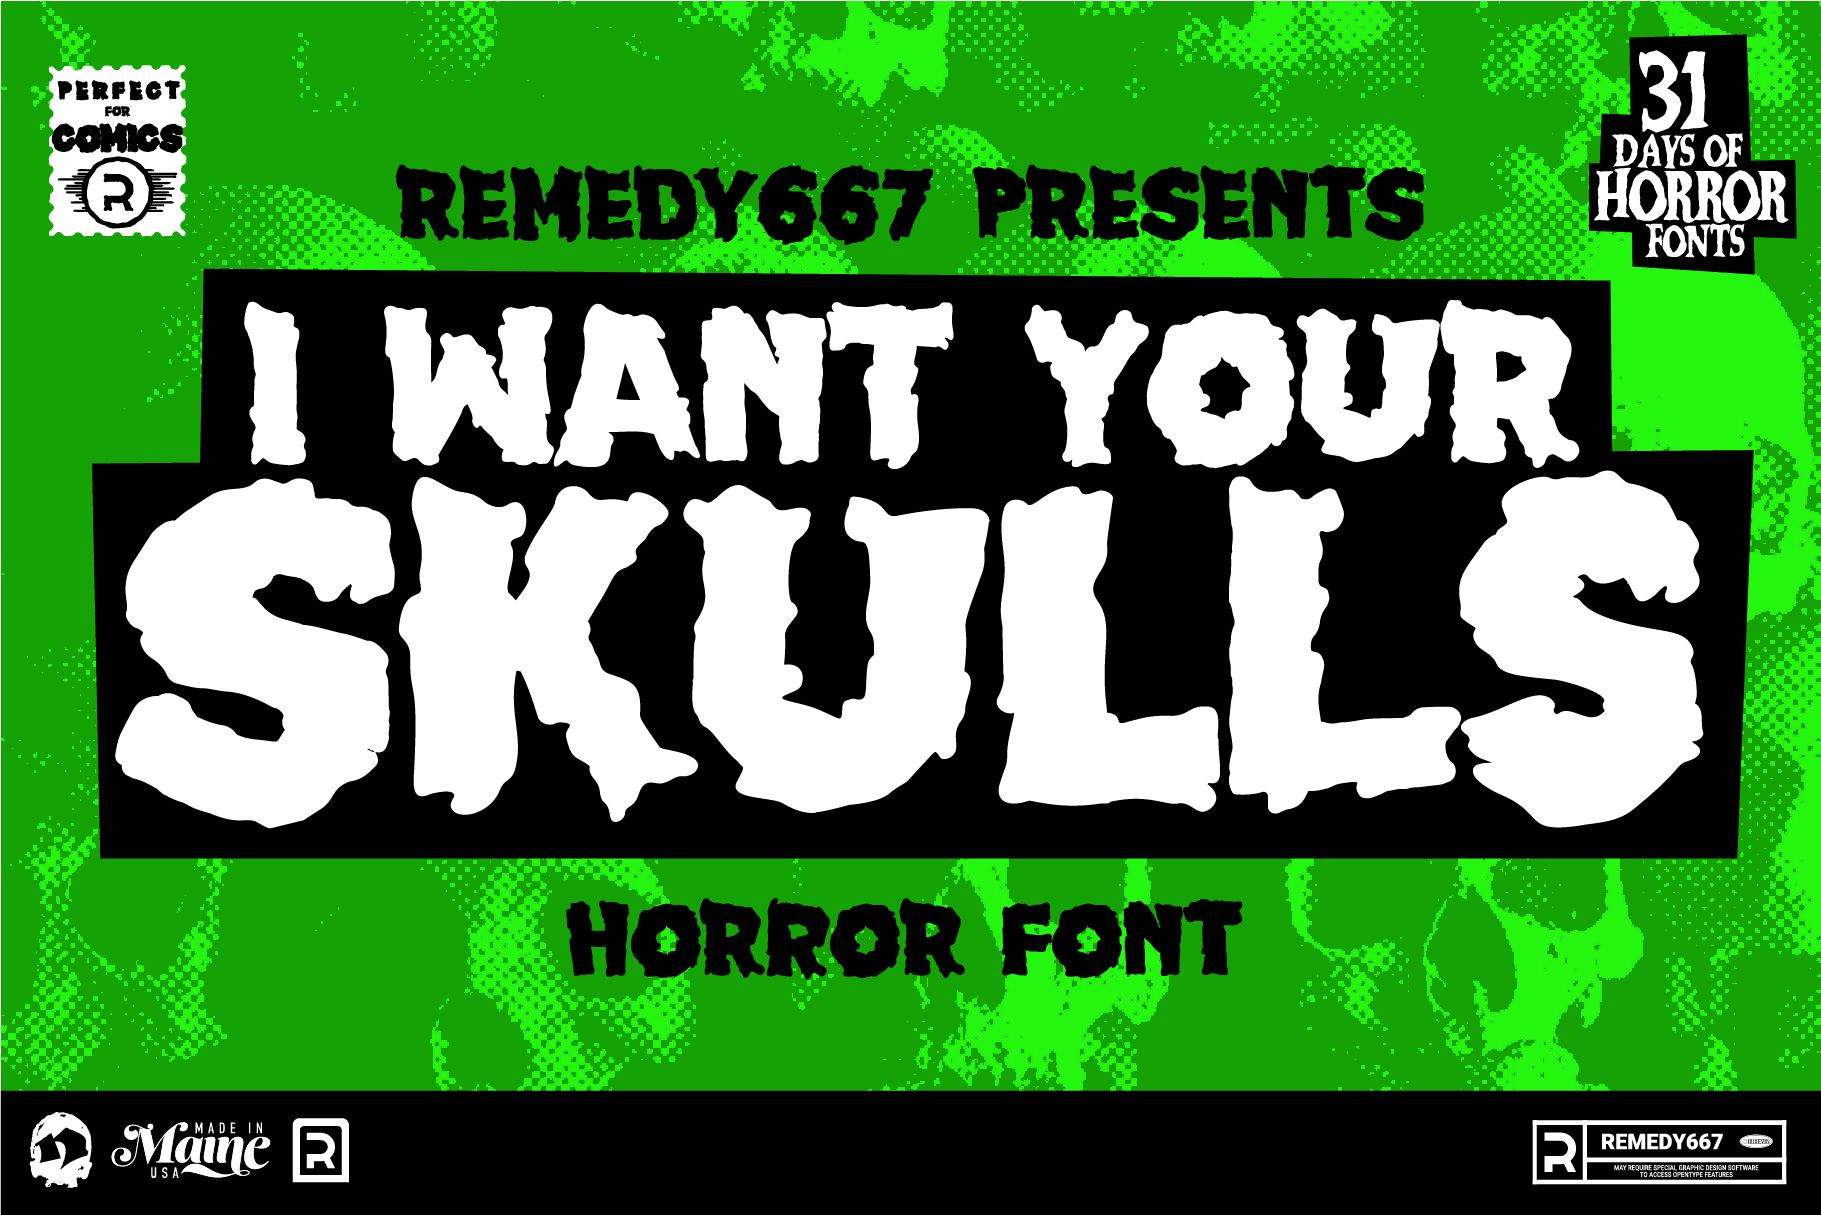 I Want Your Skulls Font by Remedy667